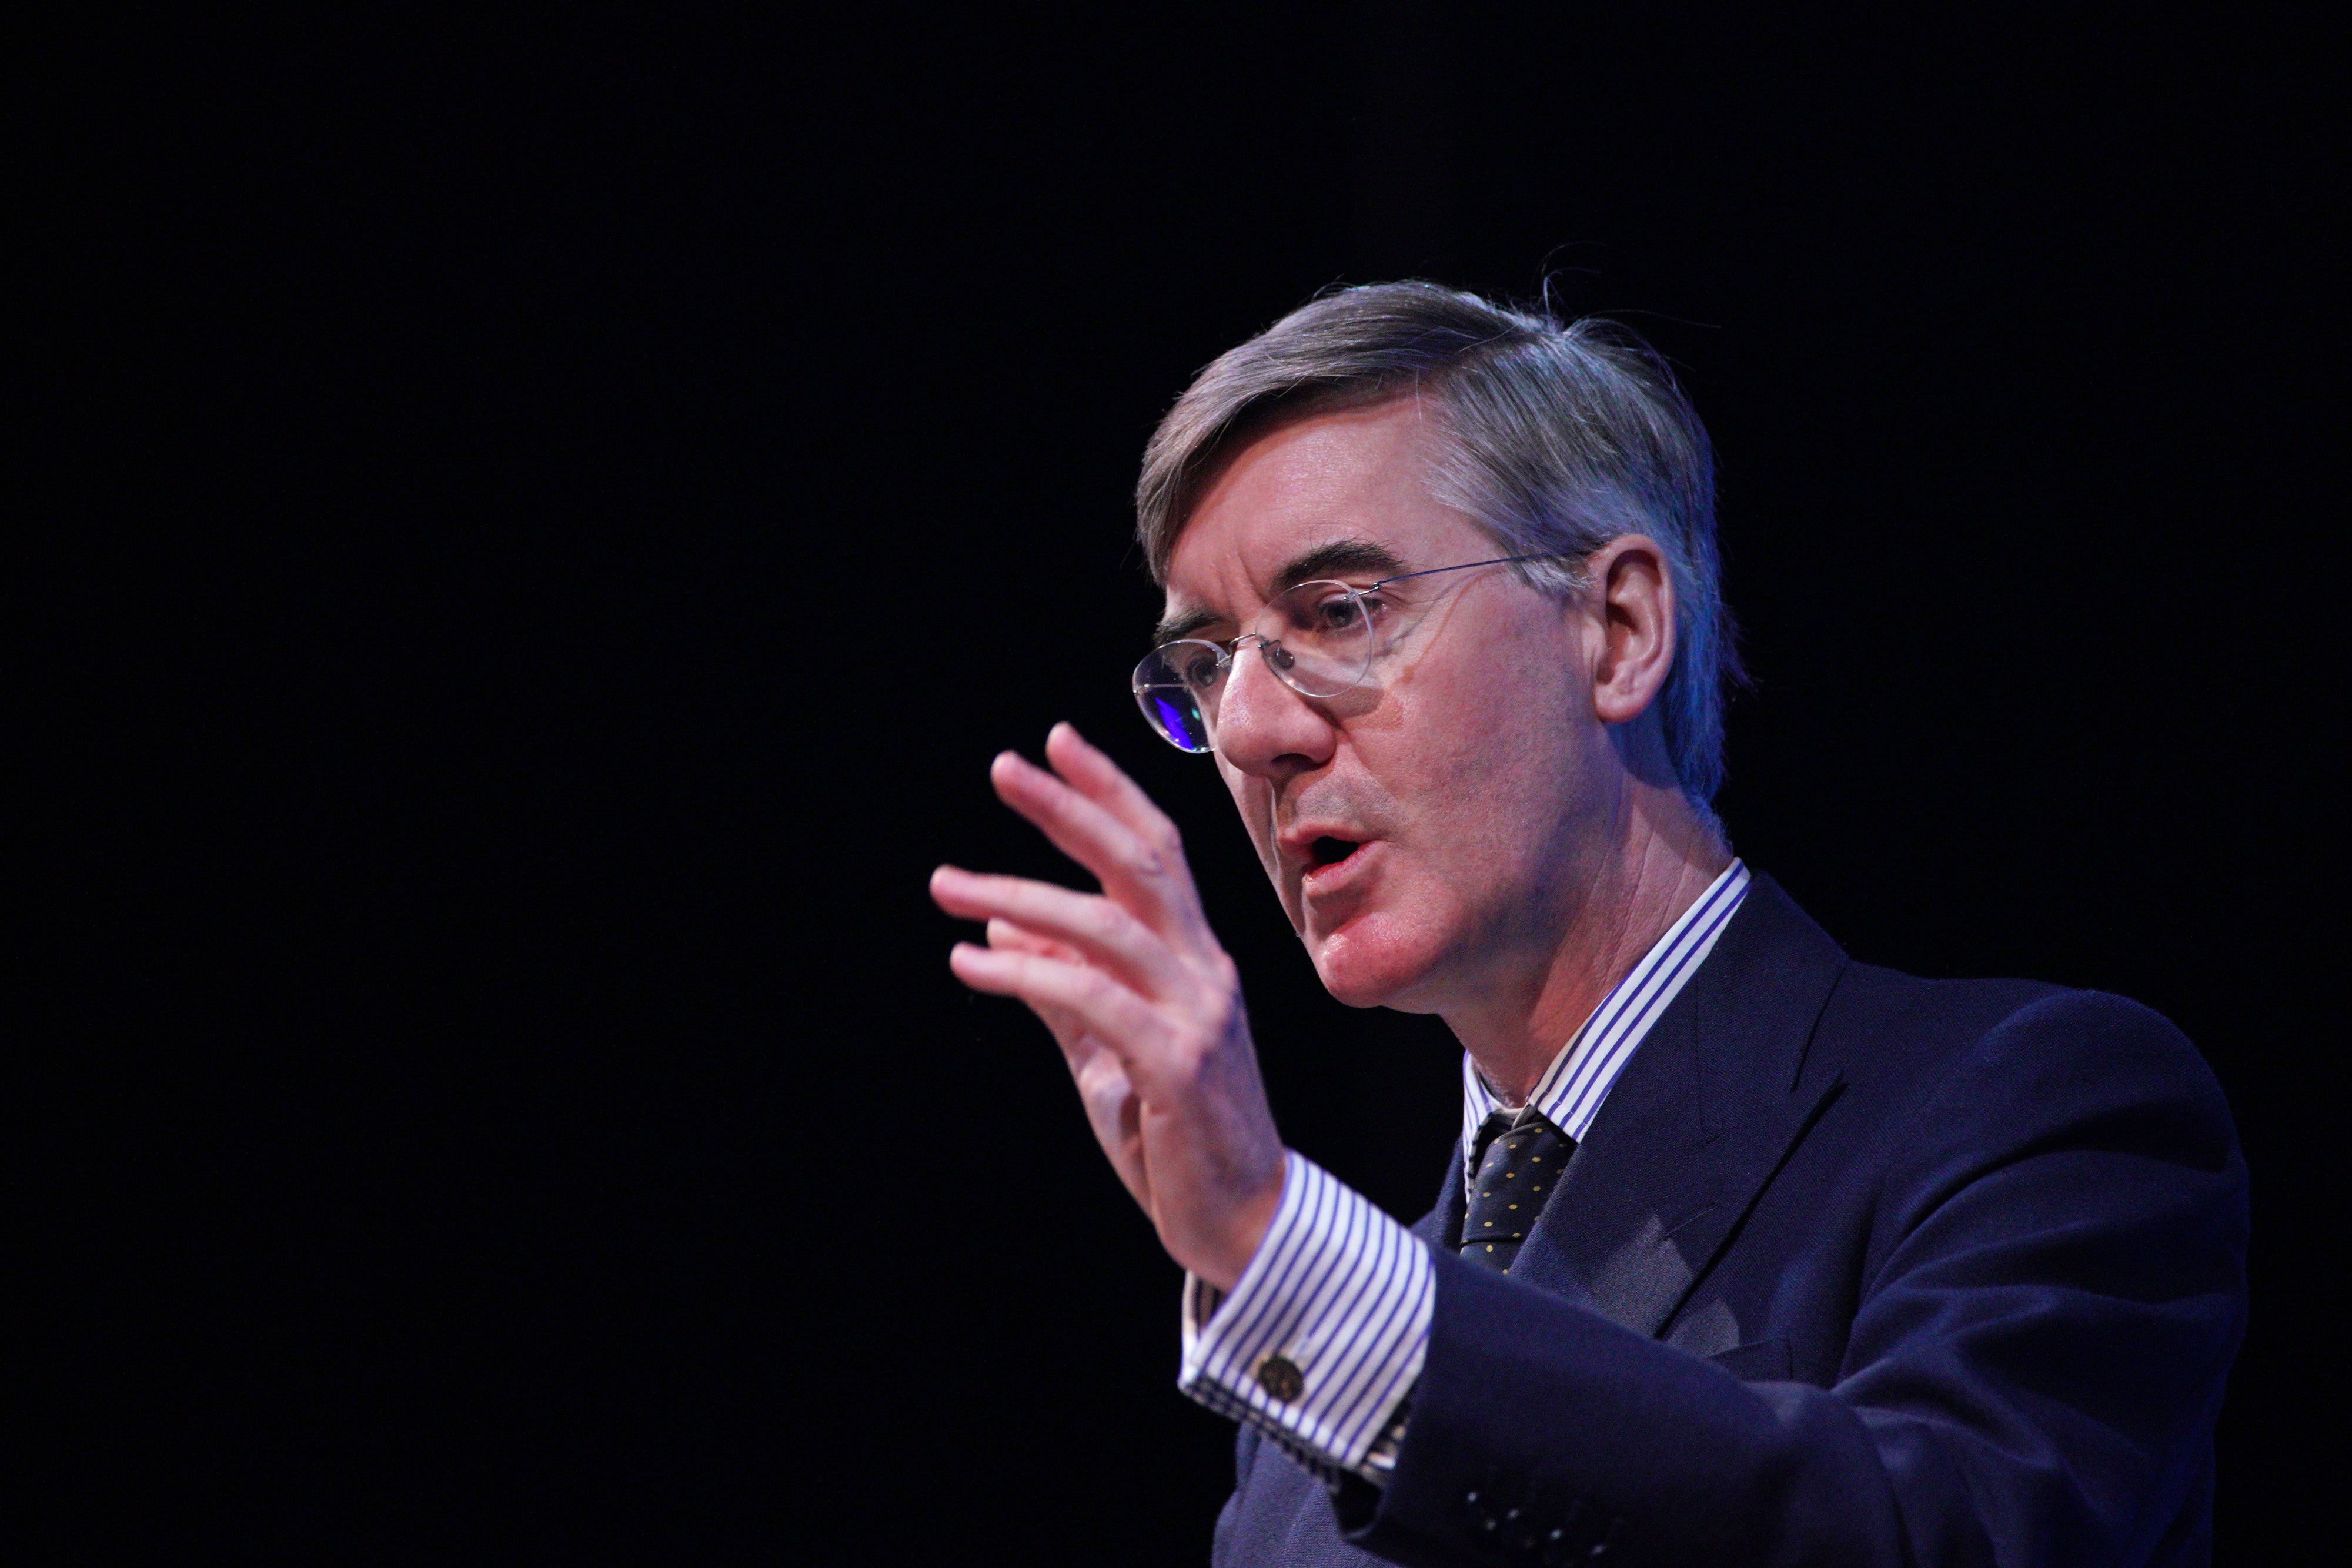 Jacob Rees-Mogg told the Conservative Party spring forum in Blackpool that, after the Russian invasion, “nobody cares” about trivia like Partygate